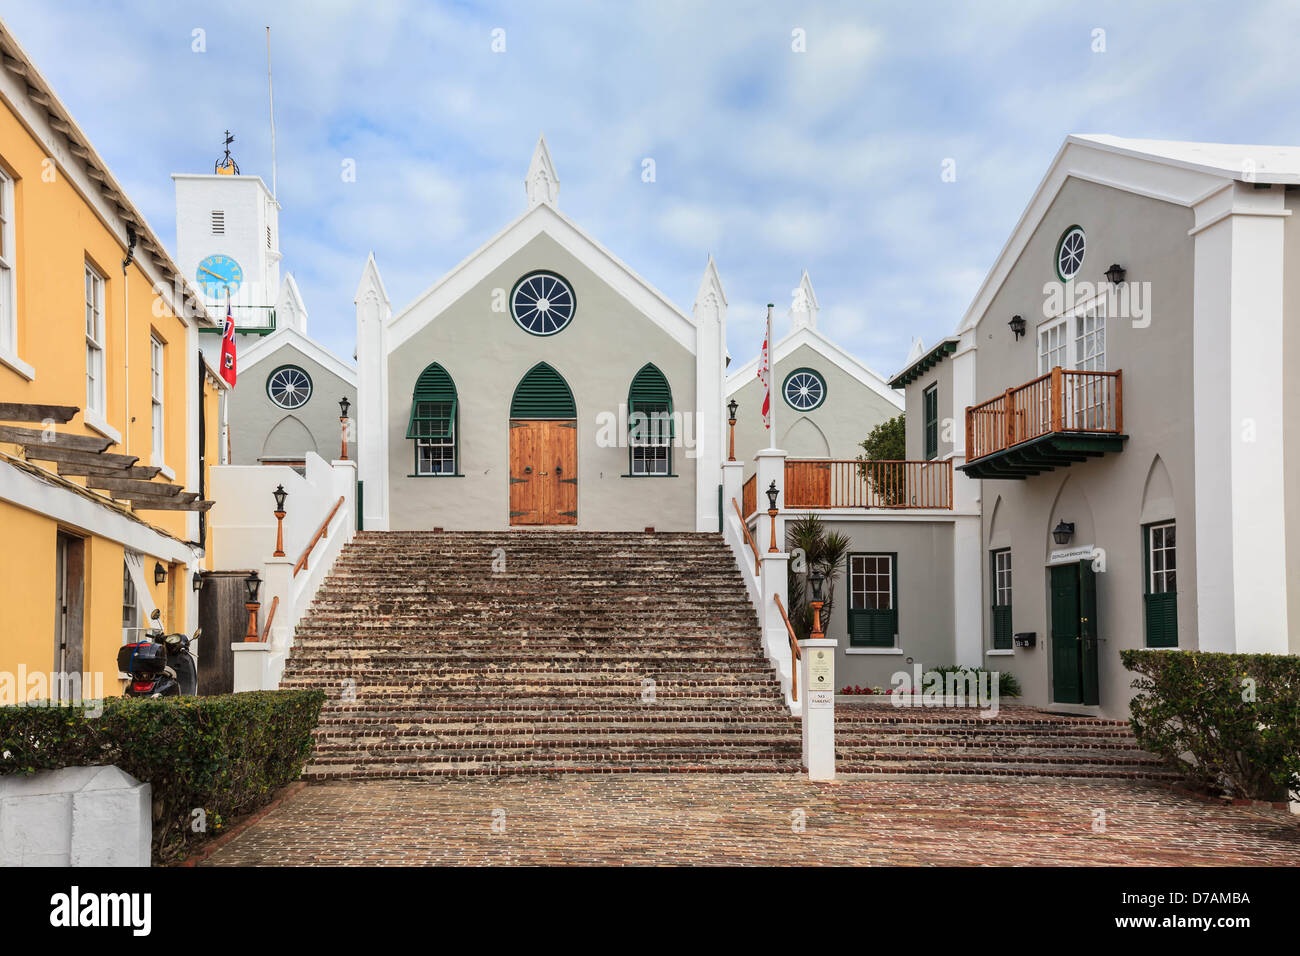 St. Peter's Anglican Church, St. George's, Bermuda. UNESCO historic site. Stock Photo